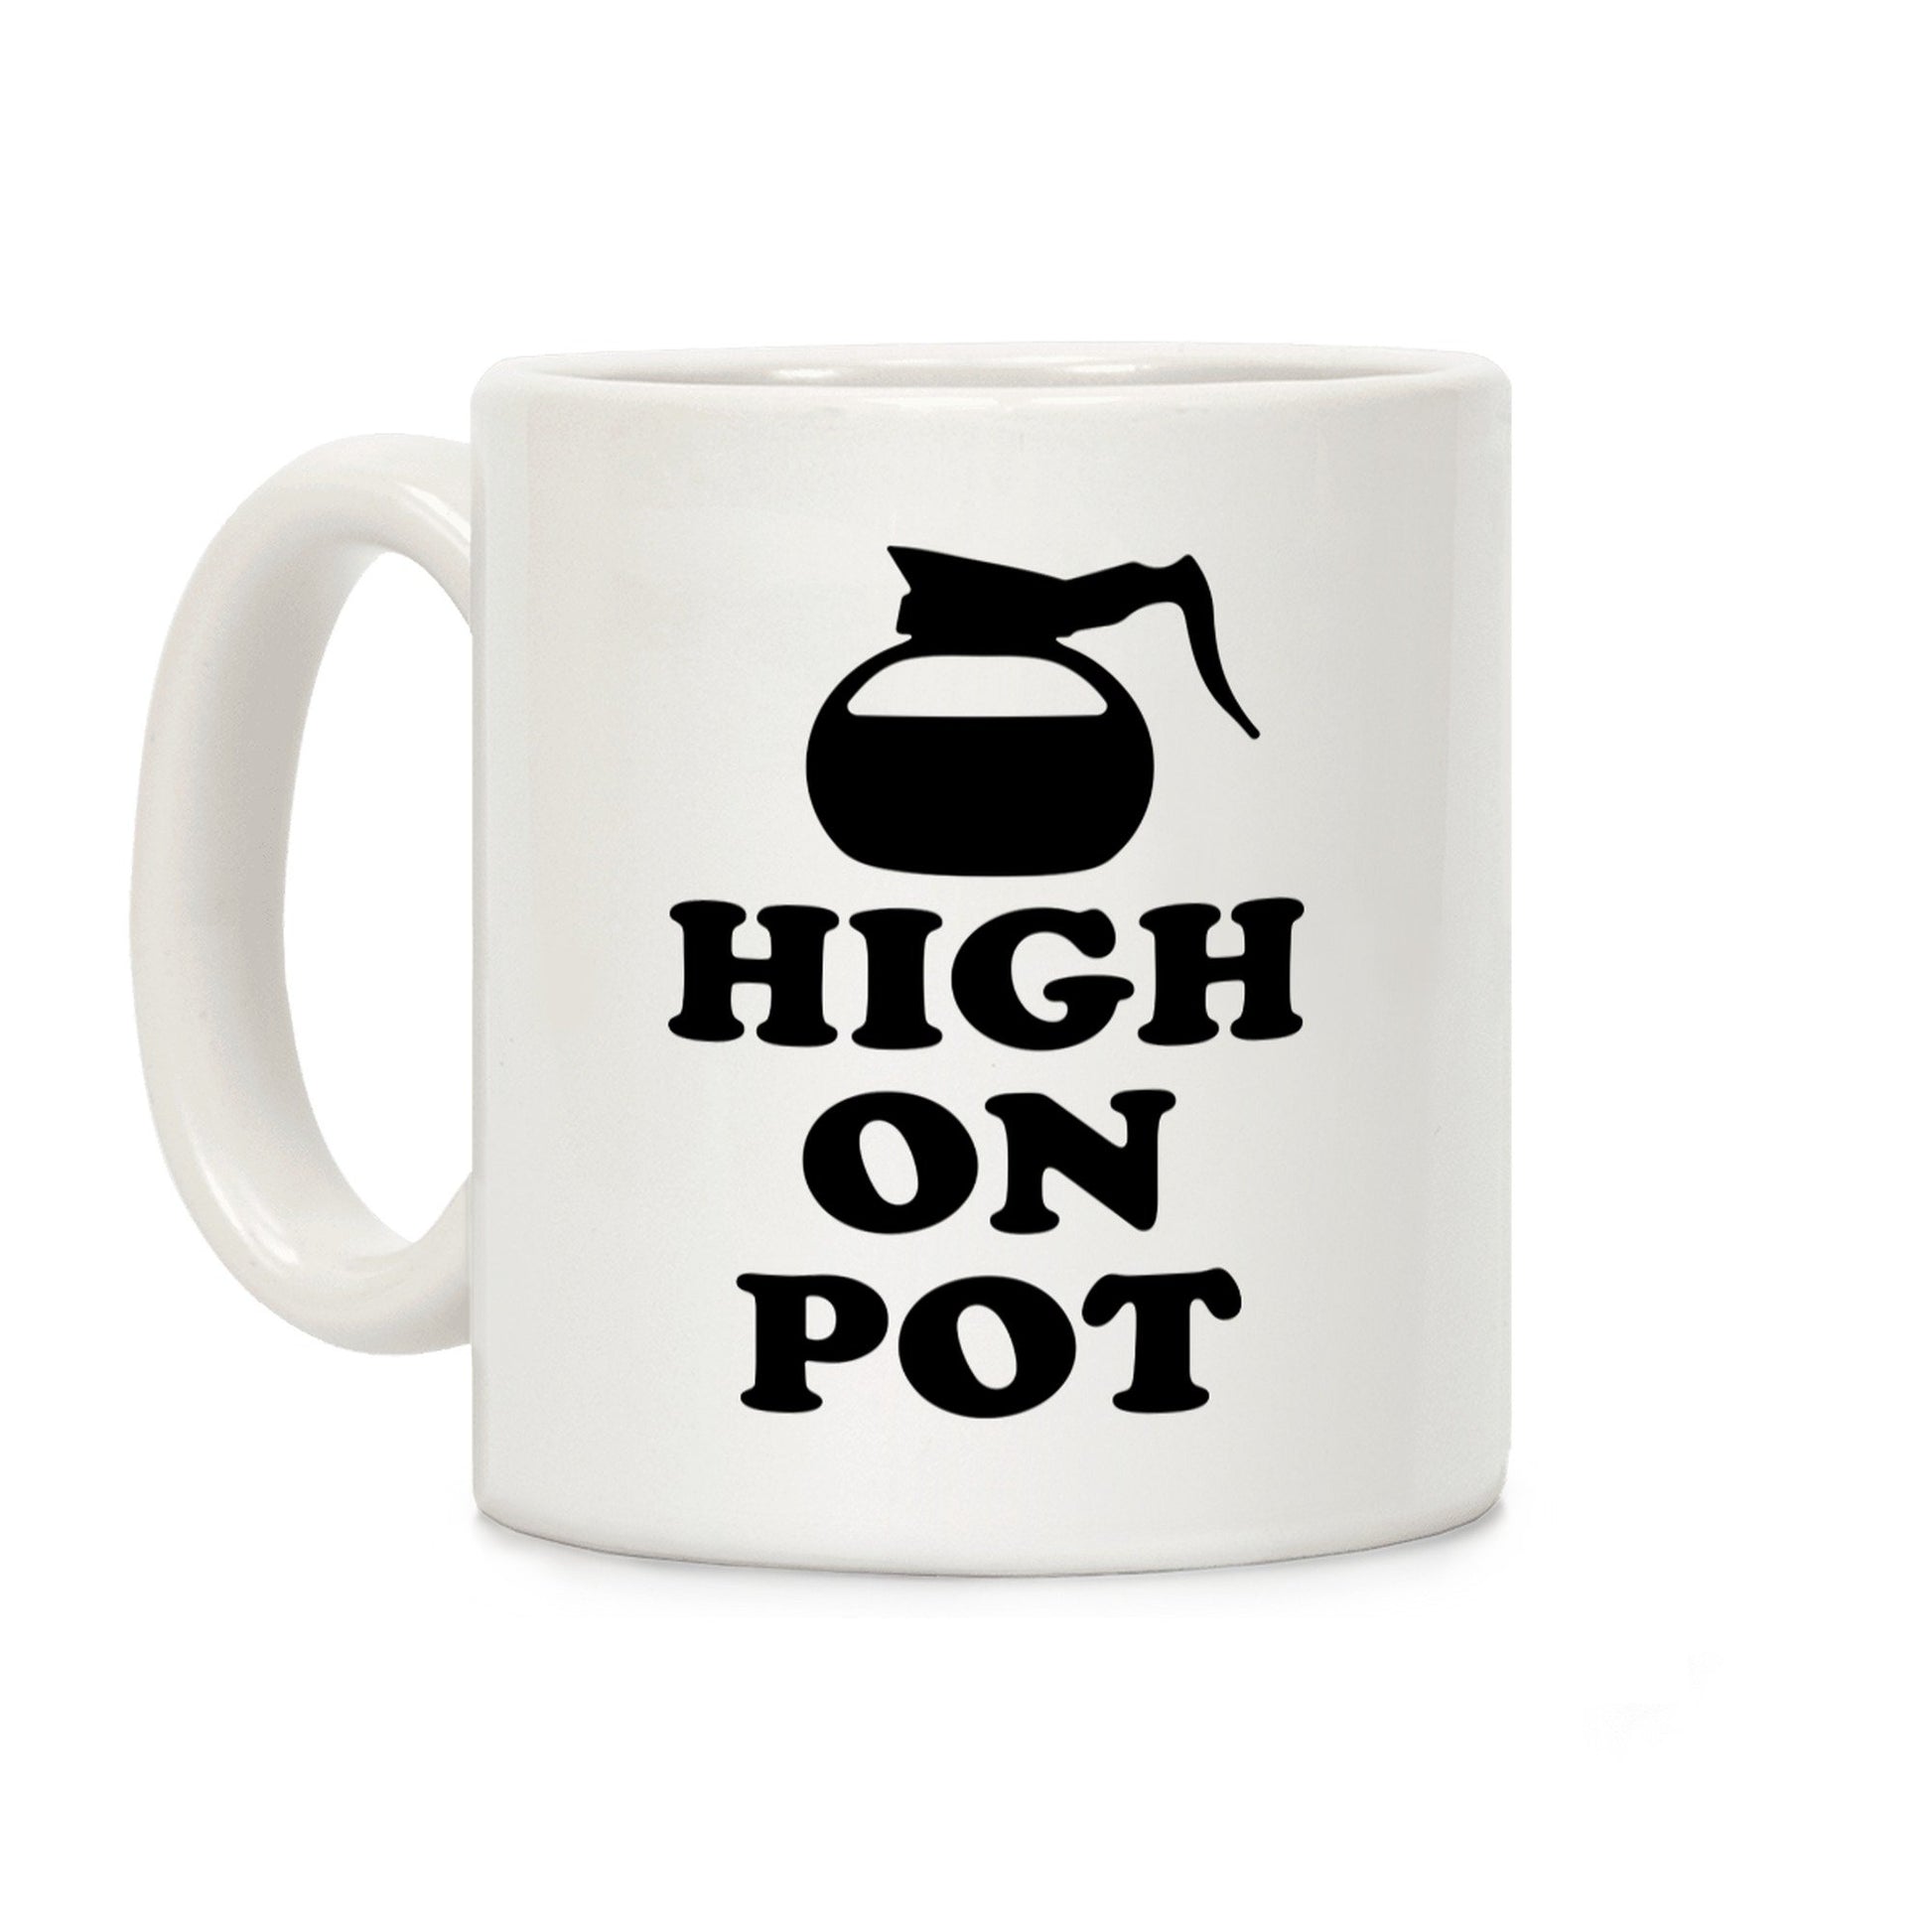 High On Pot Ceramic Coffee Mug by LookHUMAN Flower Power Packages 11 Ounce 